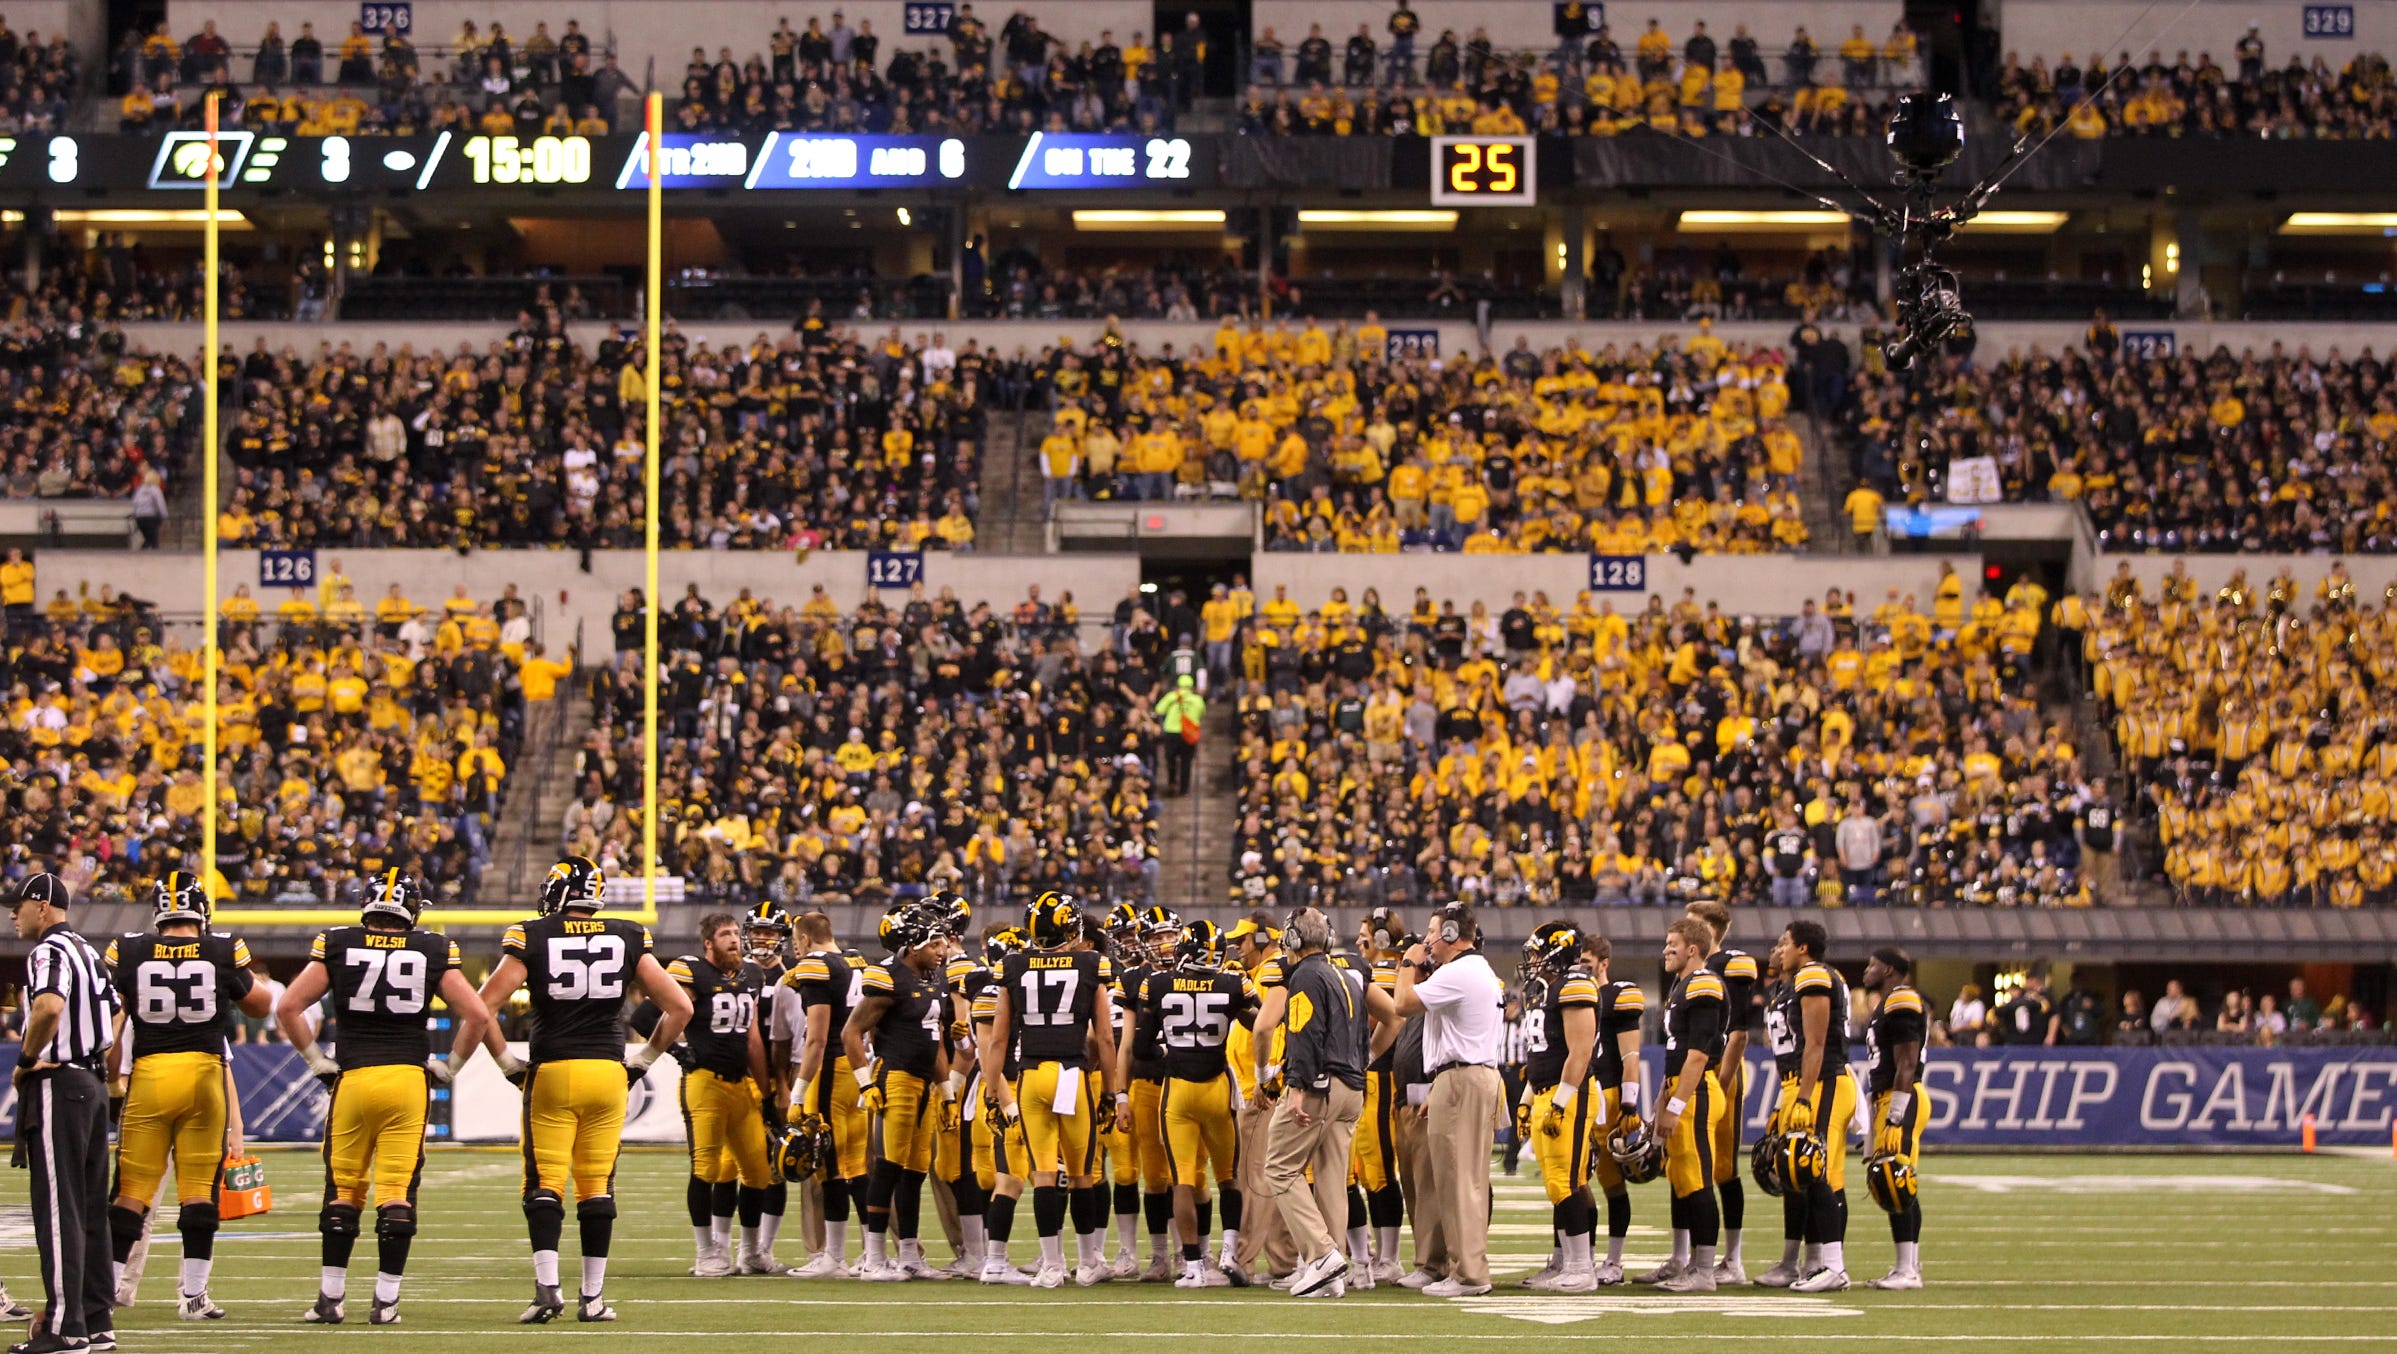 Iowa teammates huddle during a timeout from the Big Ten Championship game against Michigan State at Lucas Oil Stadium in Indianapolis, Ind. on Saturday, Dec. 5, 2015.